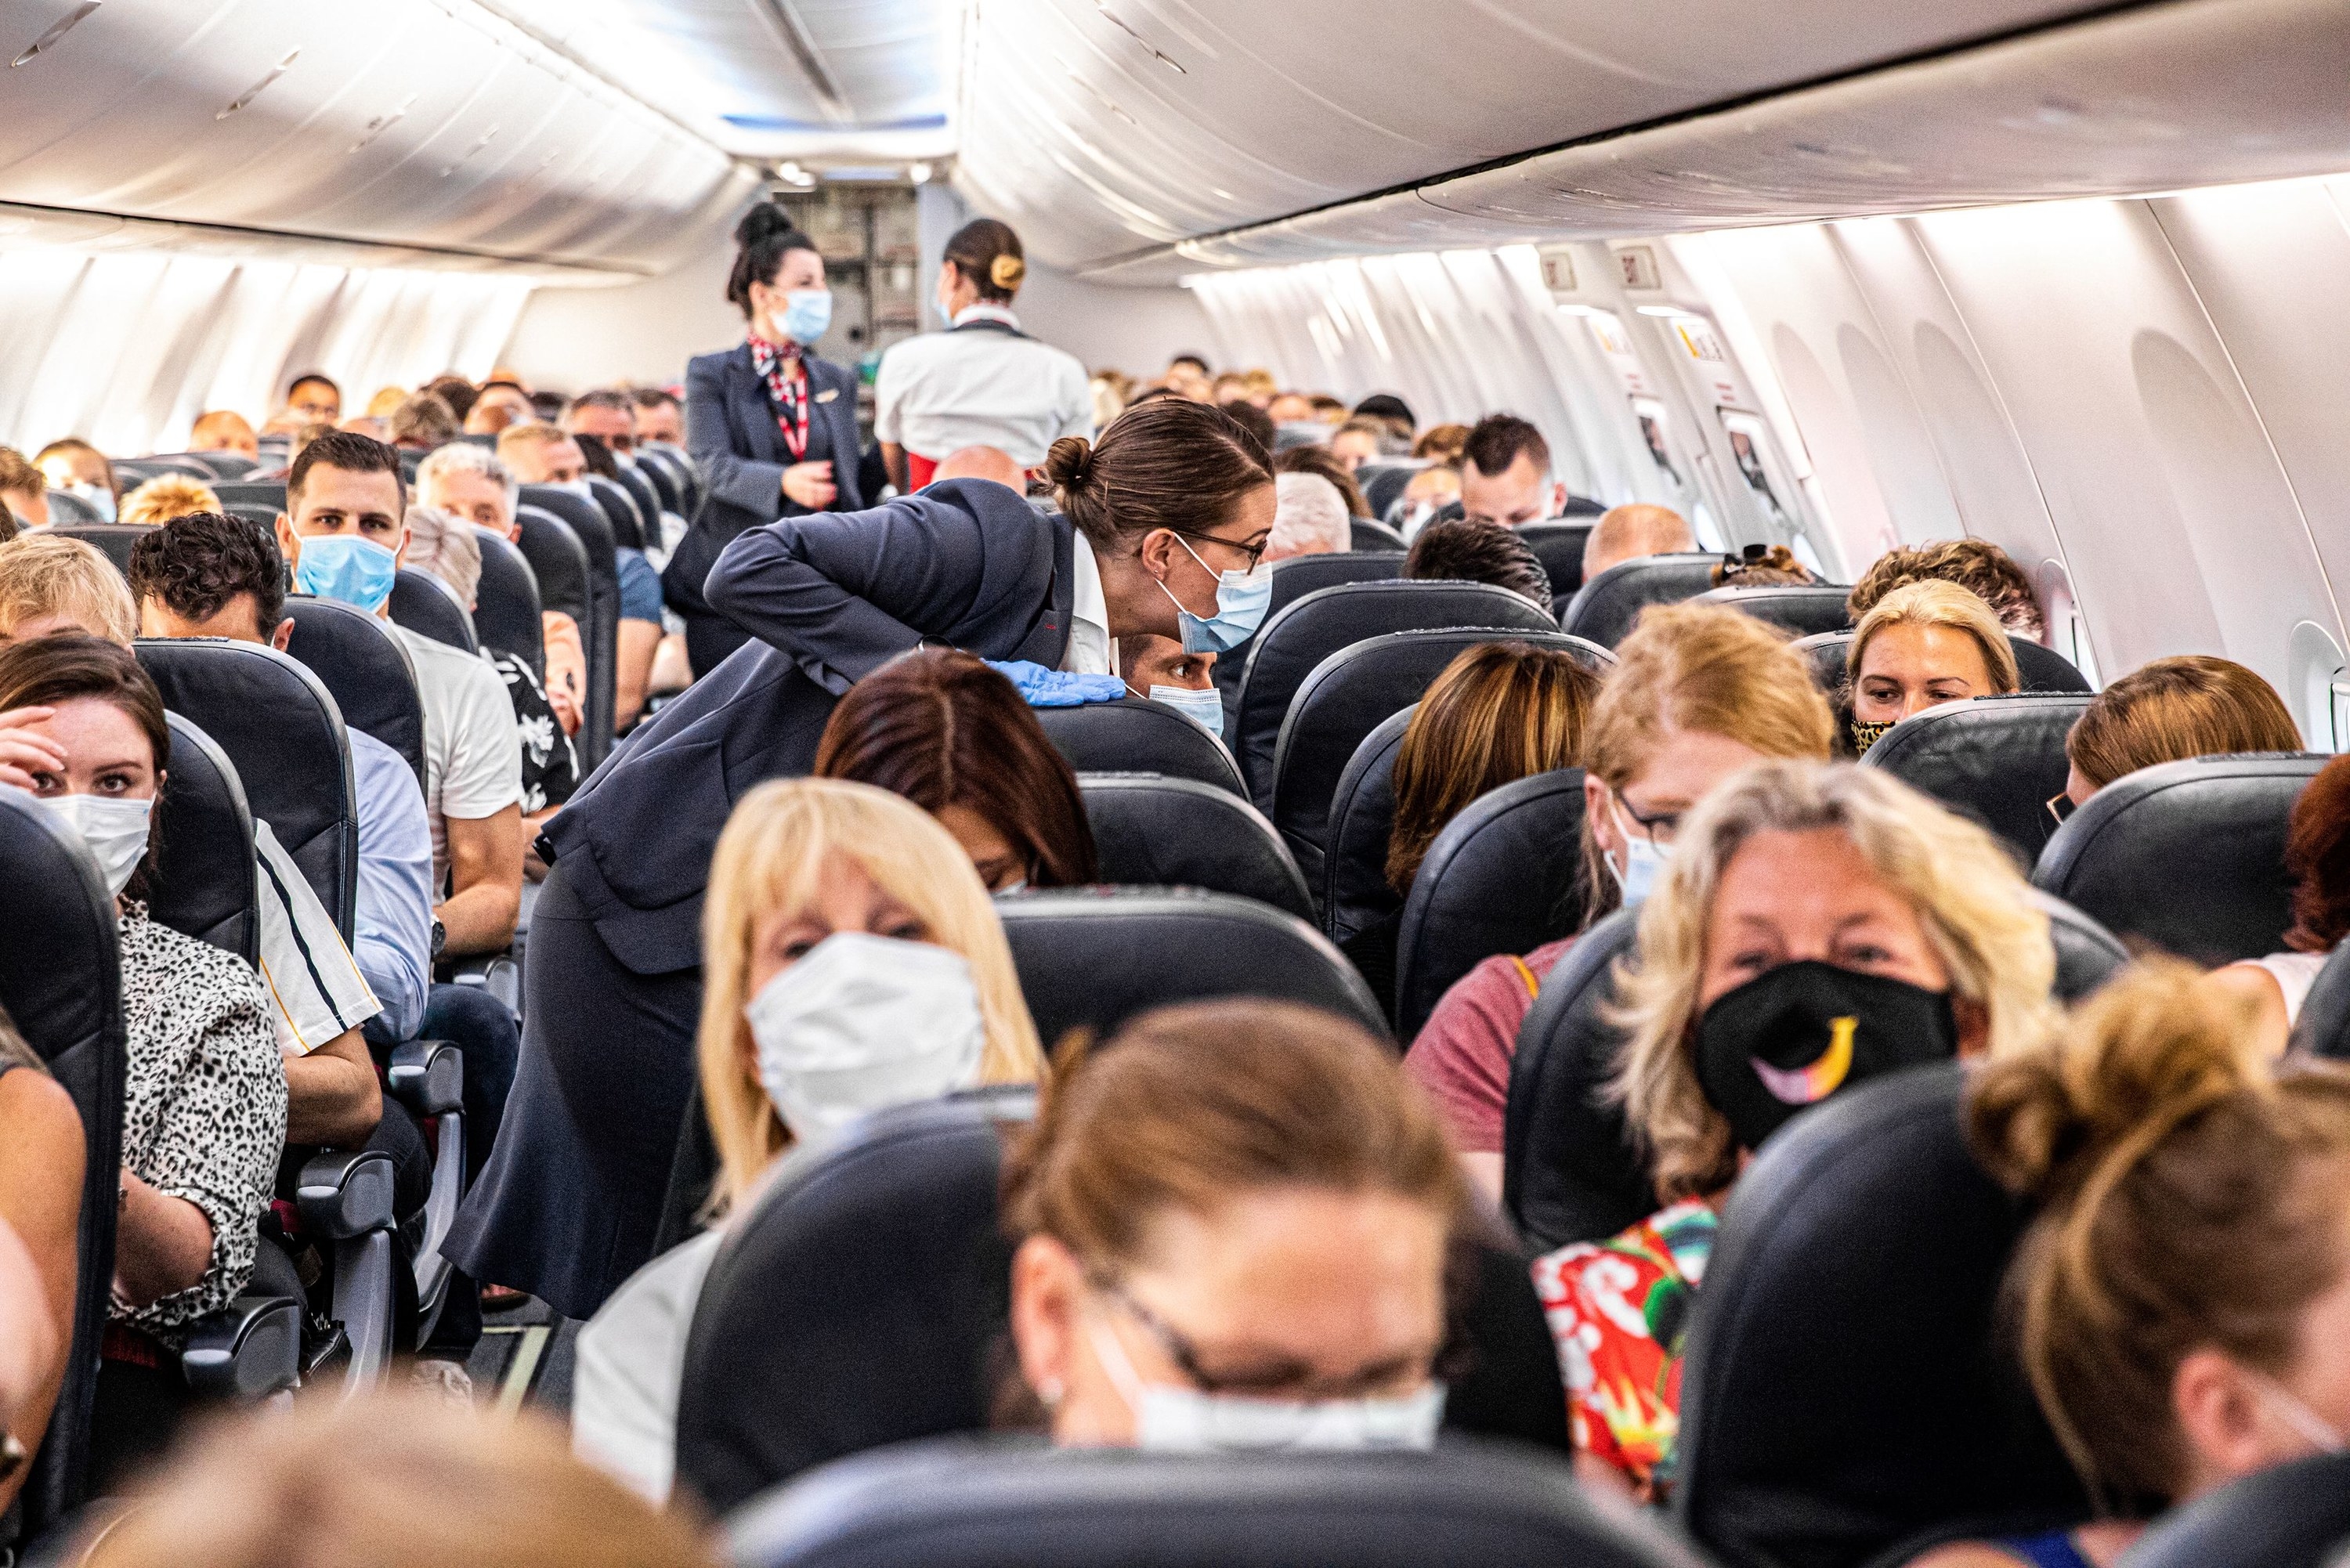 Passengers wear masks on a packed airplane